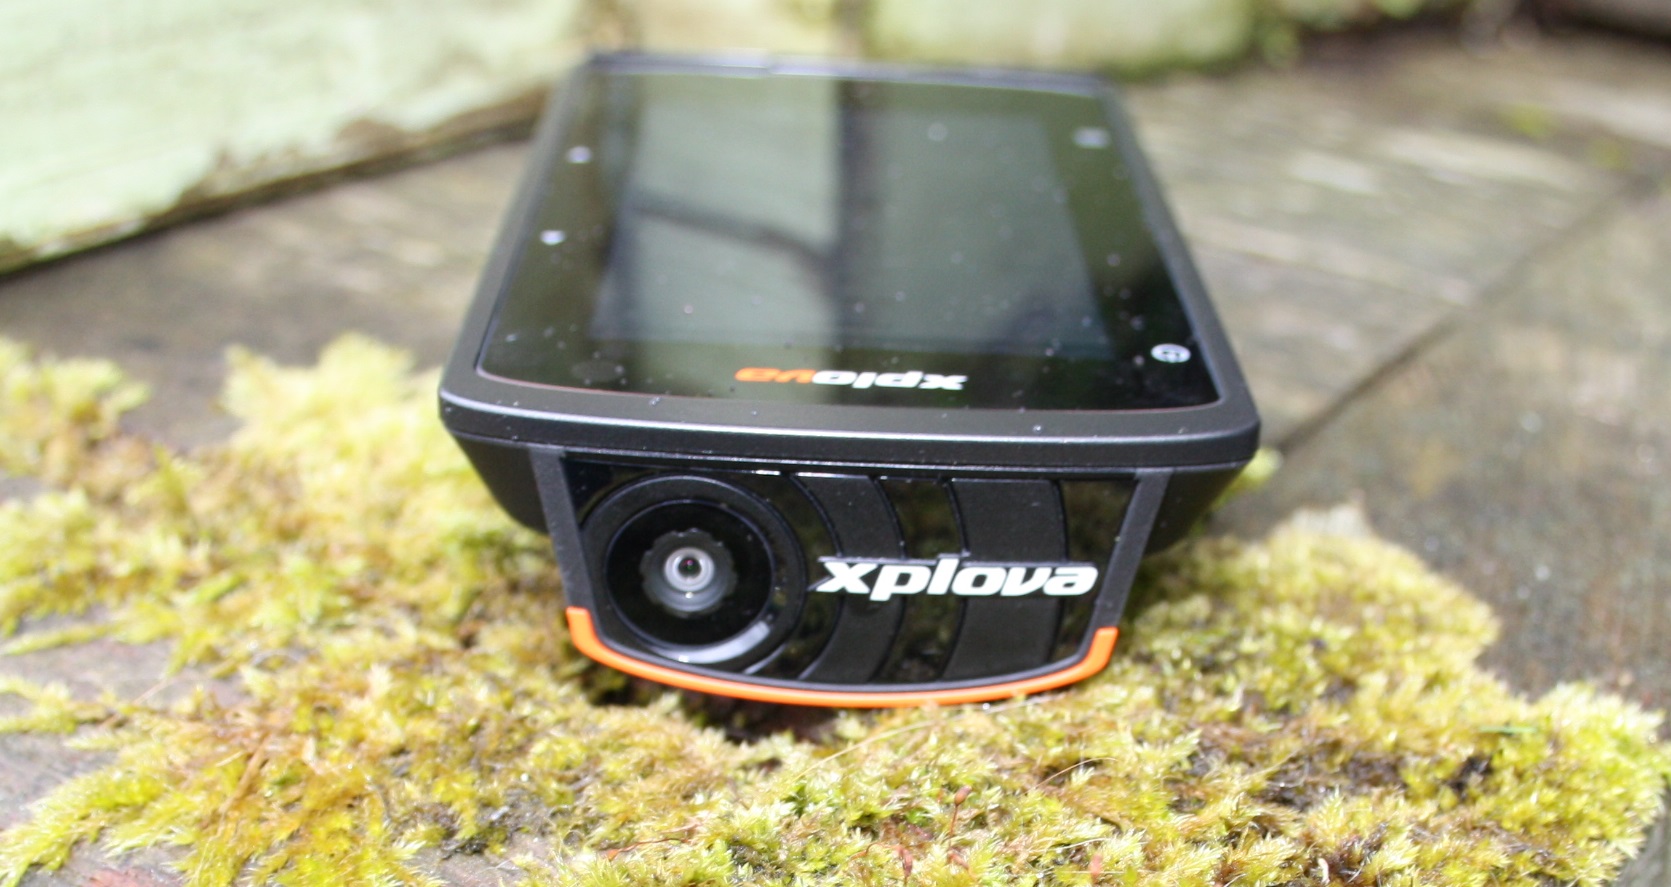 XPLOVA X5 (Acer) Smart Video Cycling Computer Review